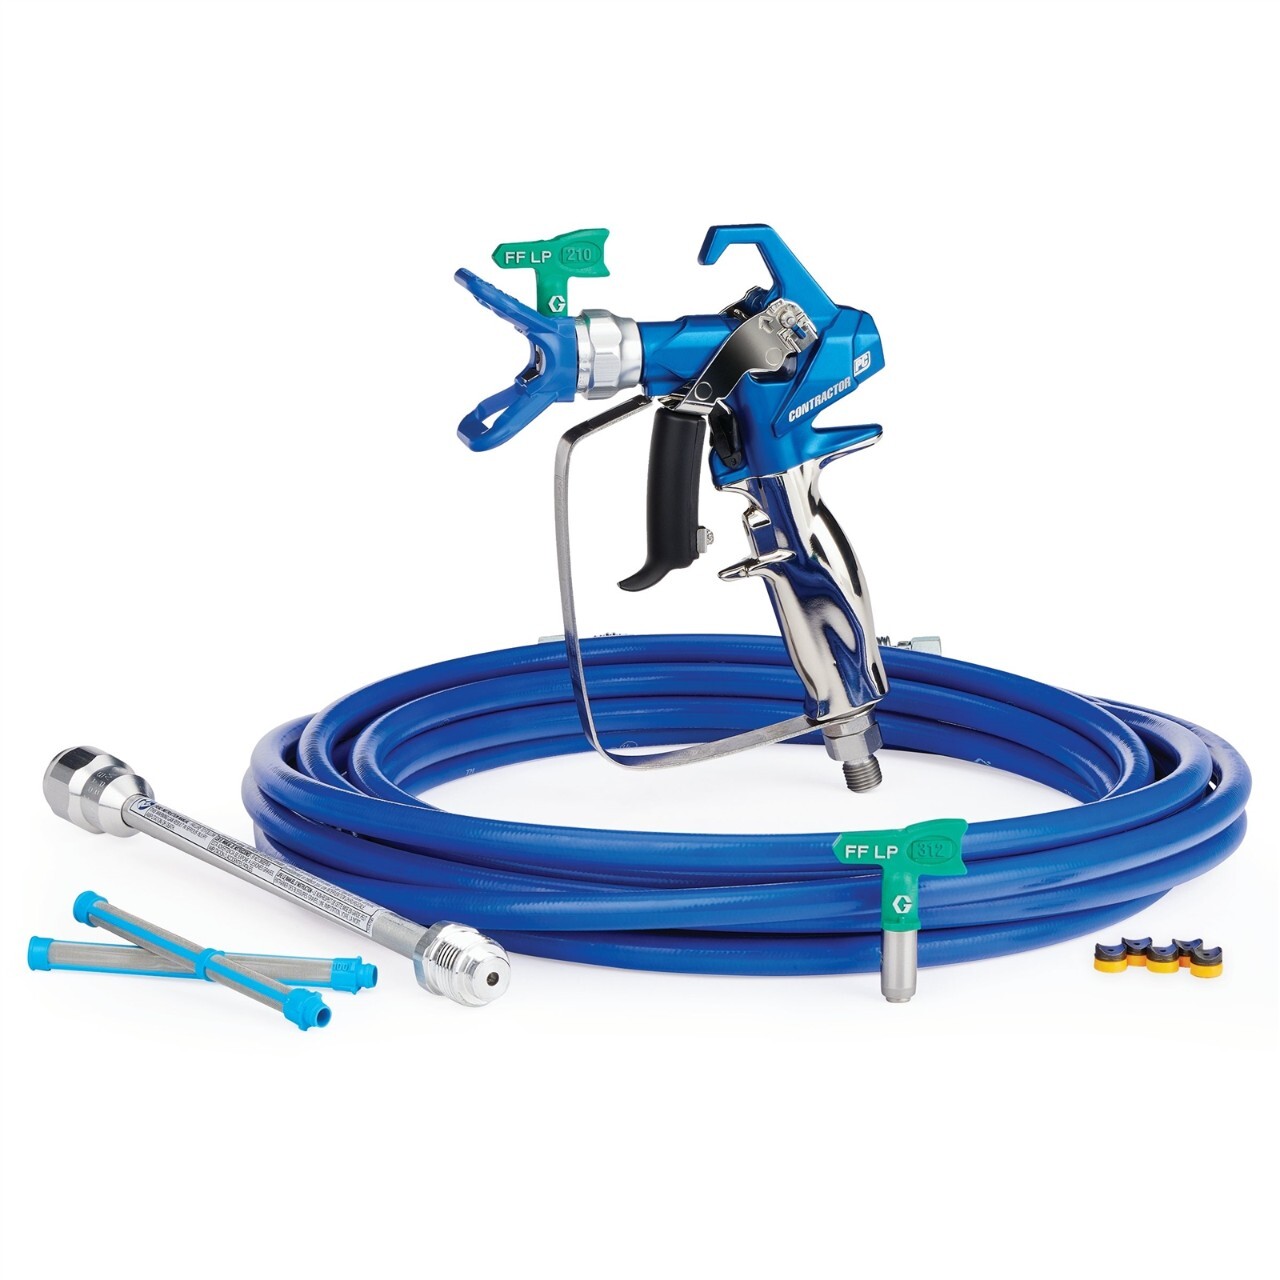 skrubbe Stuepige pence Graco Contractor PC Airless Spray Gun, 1/4 in Airless Hose | Spray  Equipment & Service Center